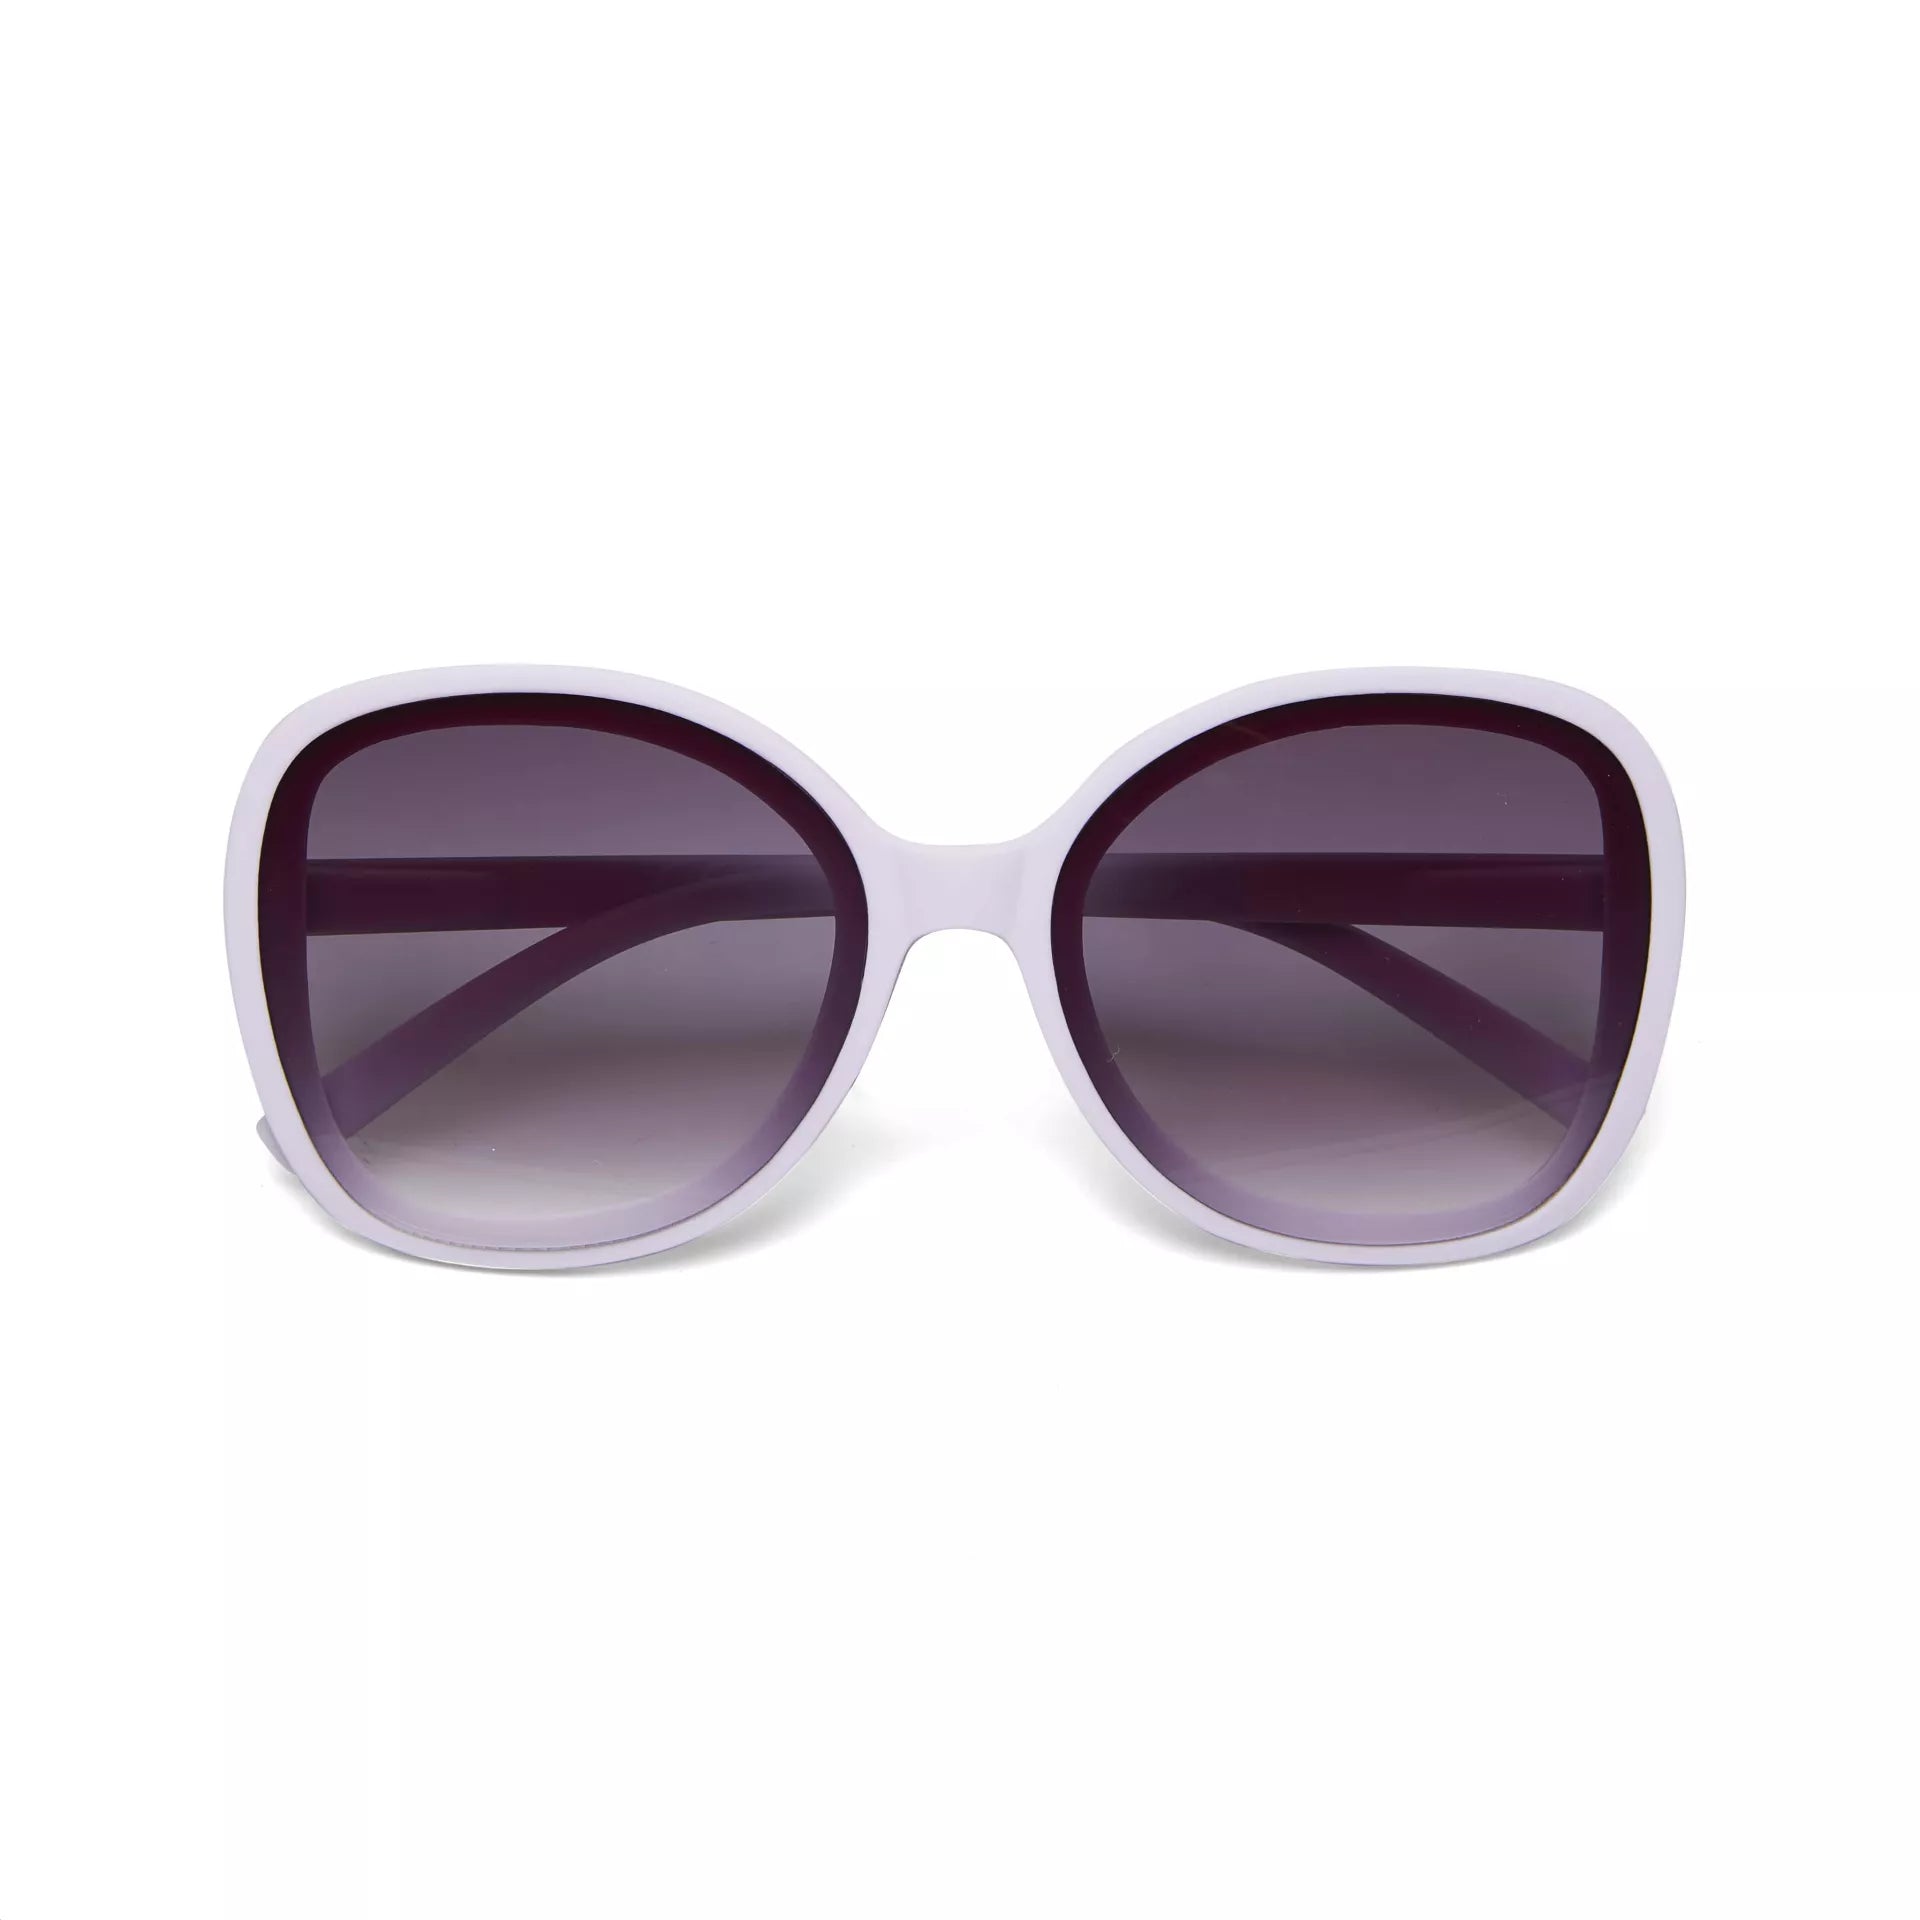 Fabulous Gifts Okkia Sunglasses Butterfly Lilac Breeze by Weirs of Baggot Street